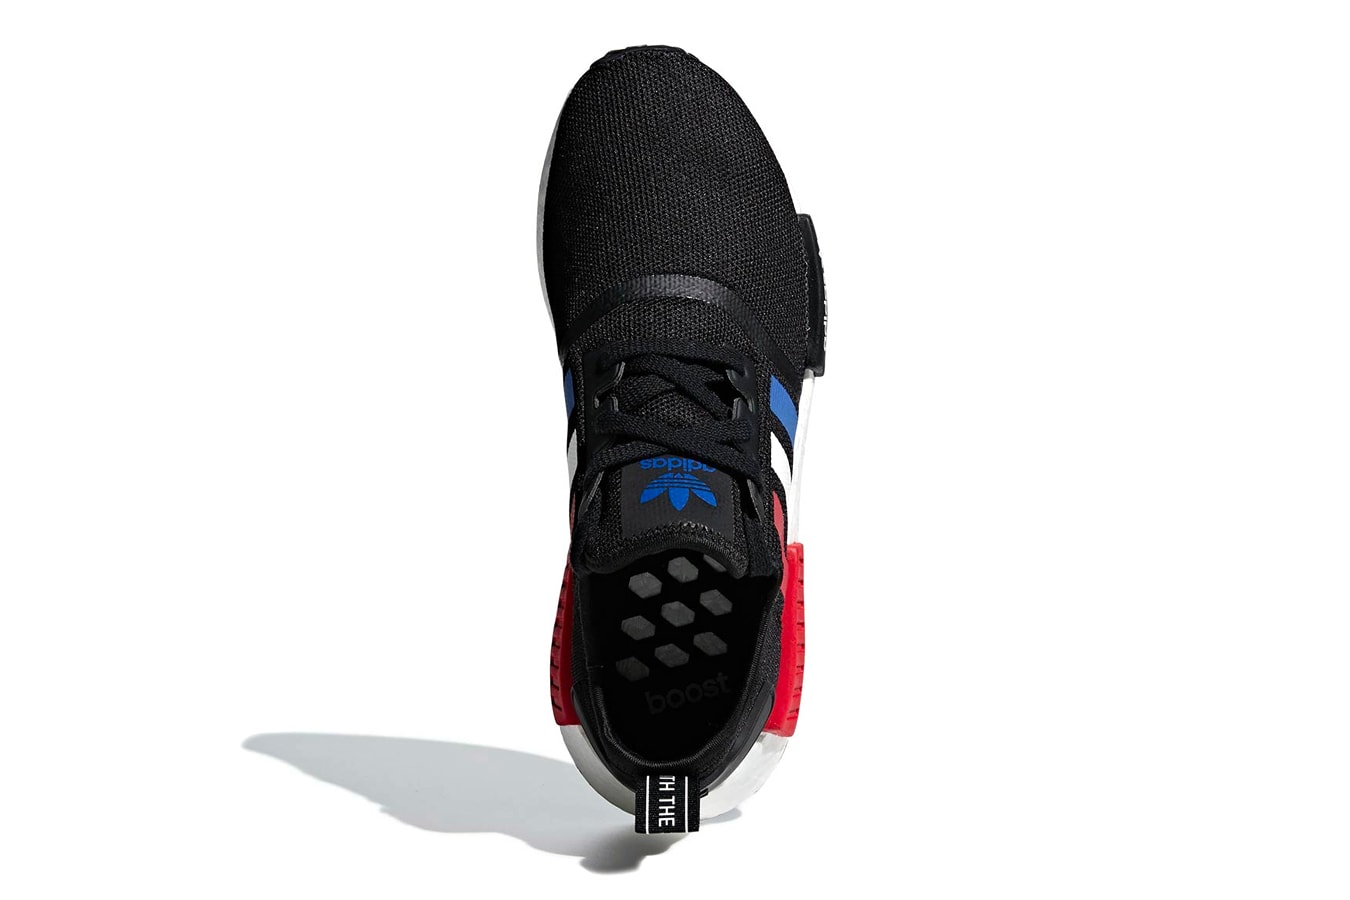 adidas NMD R1 black red white blue release info sneakers